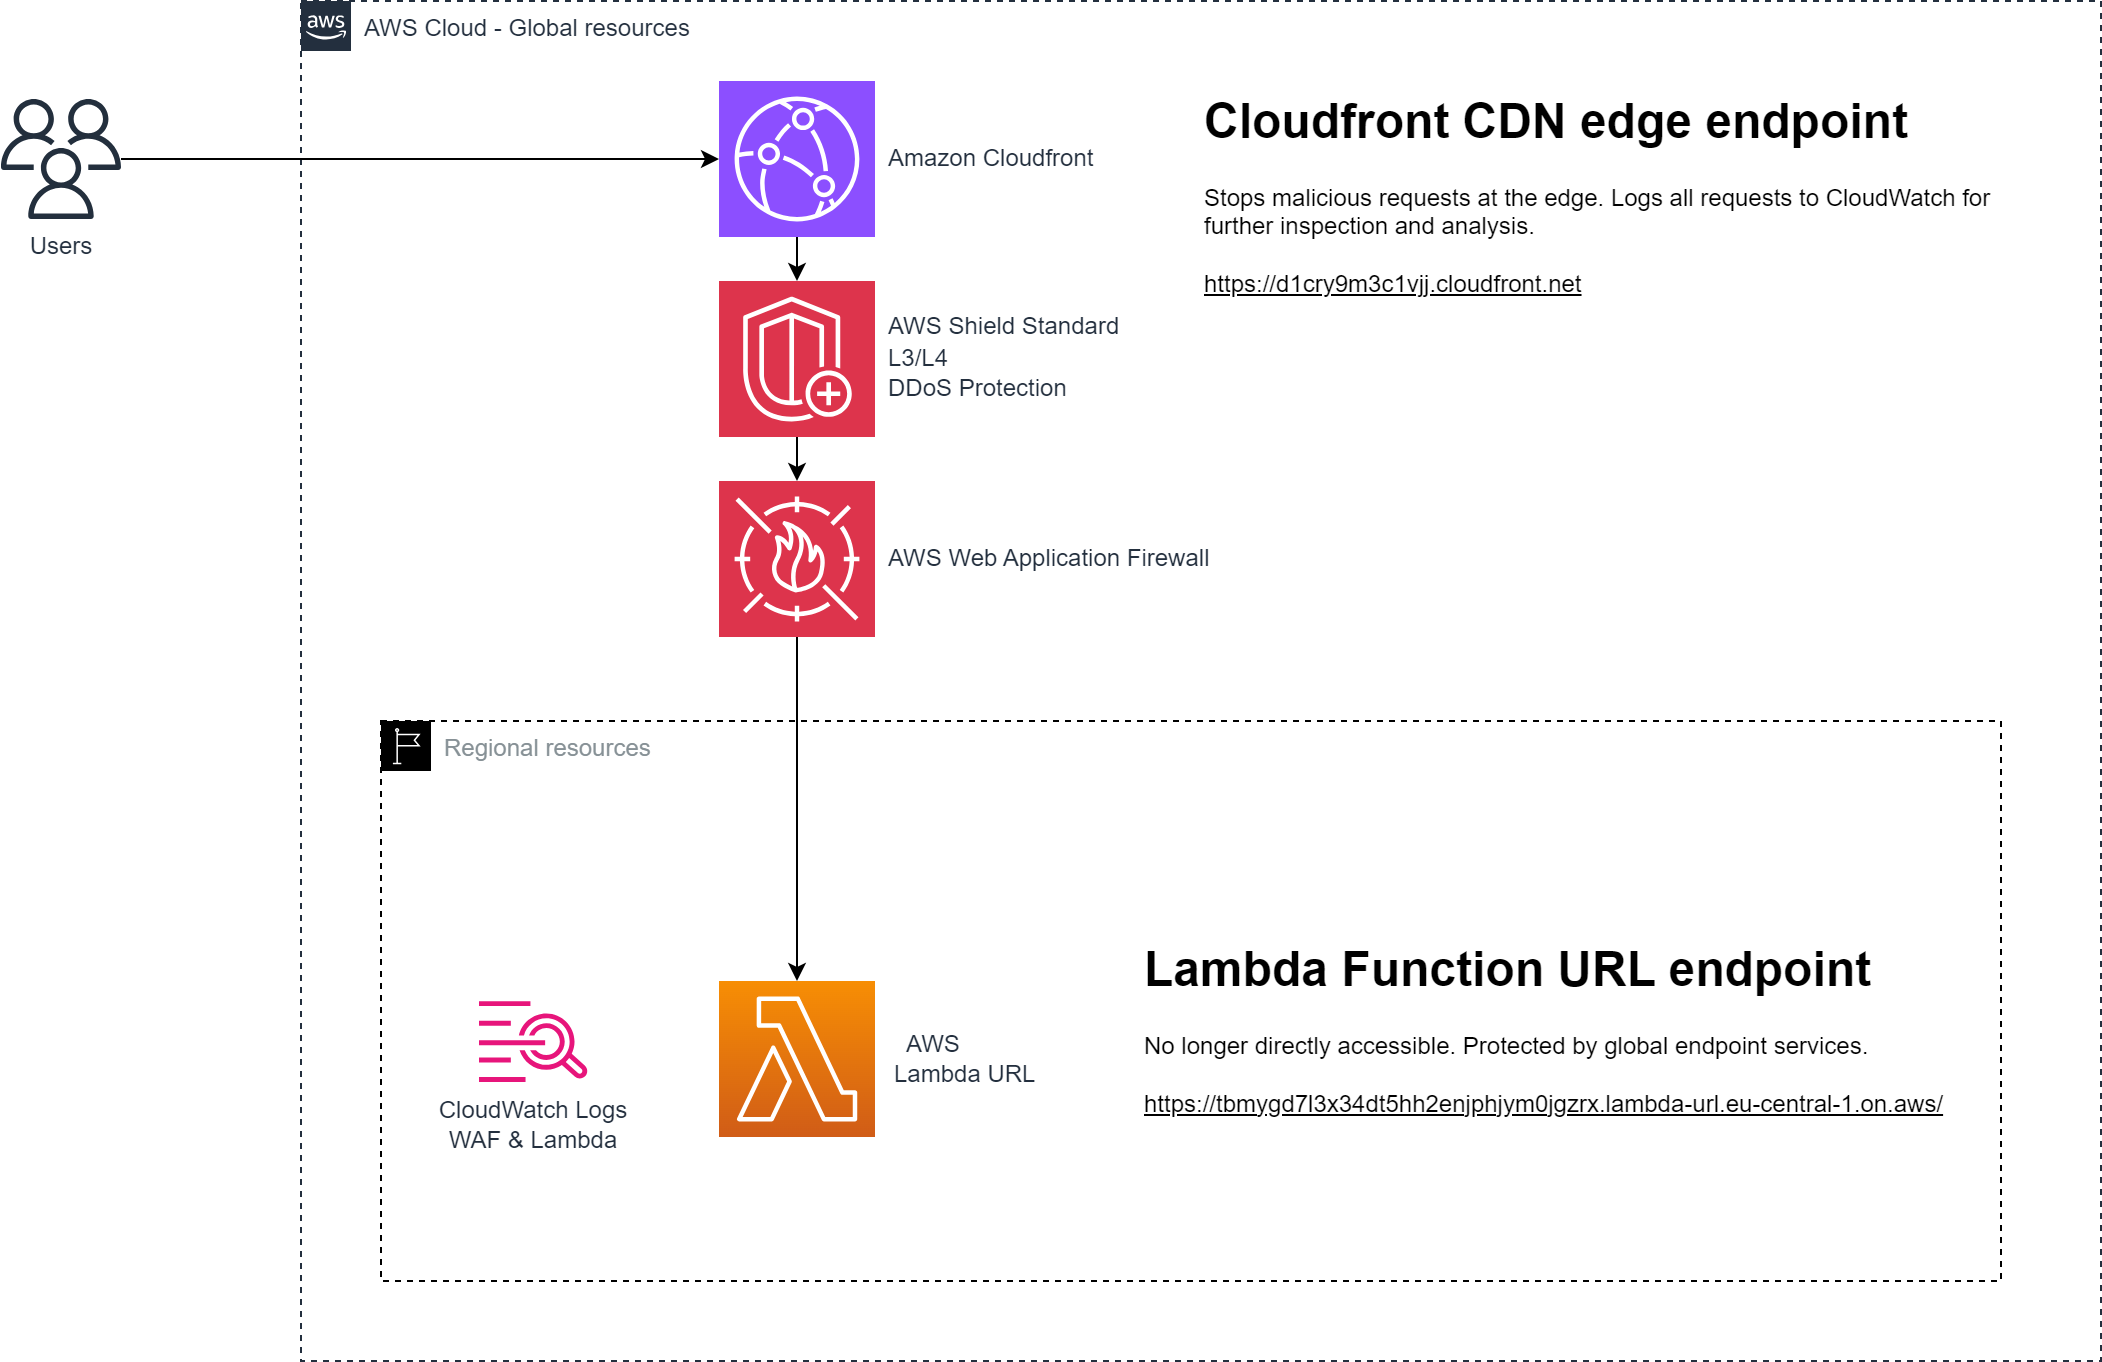 Develop lightweight and secure REST APIs with AWS Lambda Function URL and Terraform